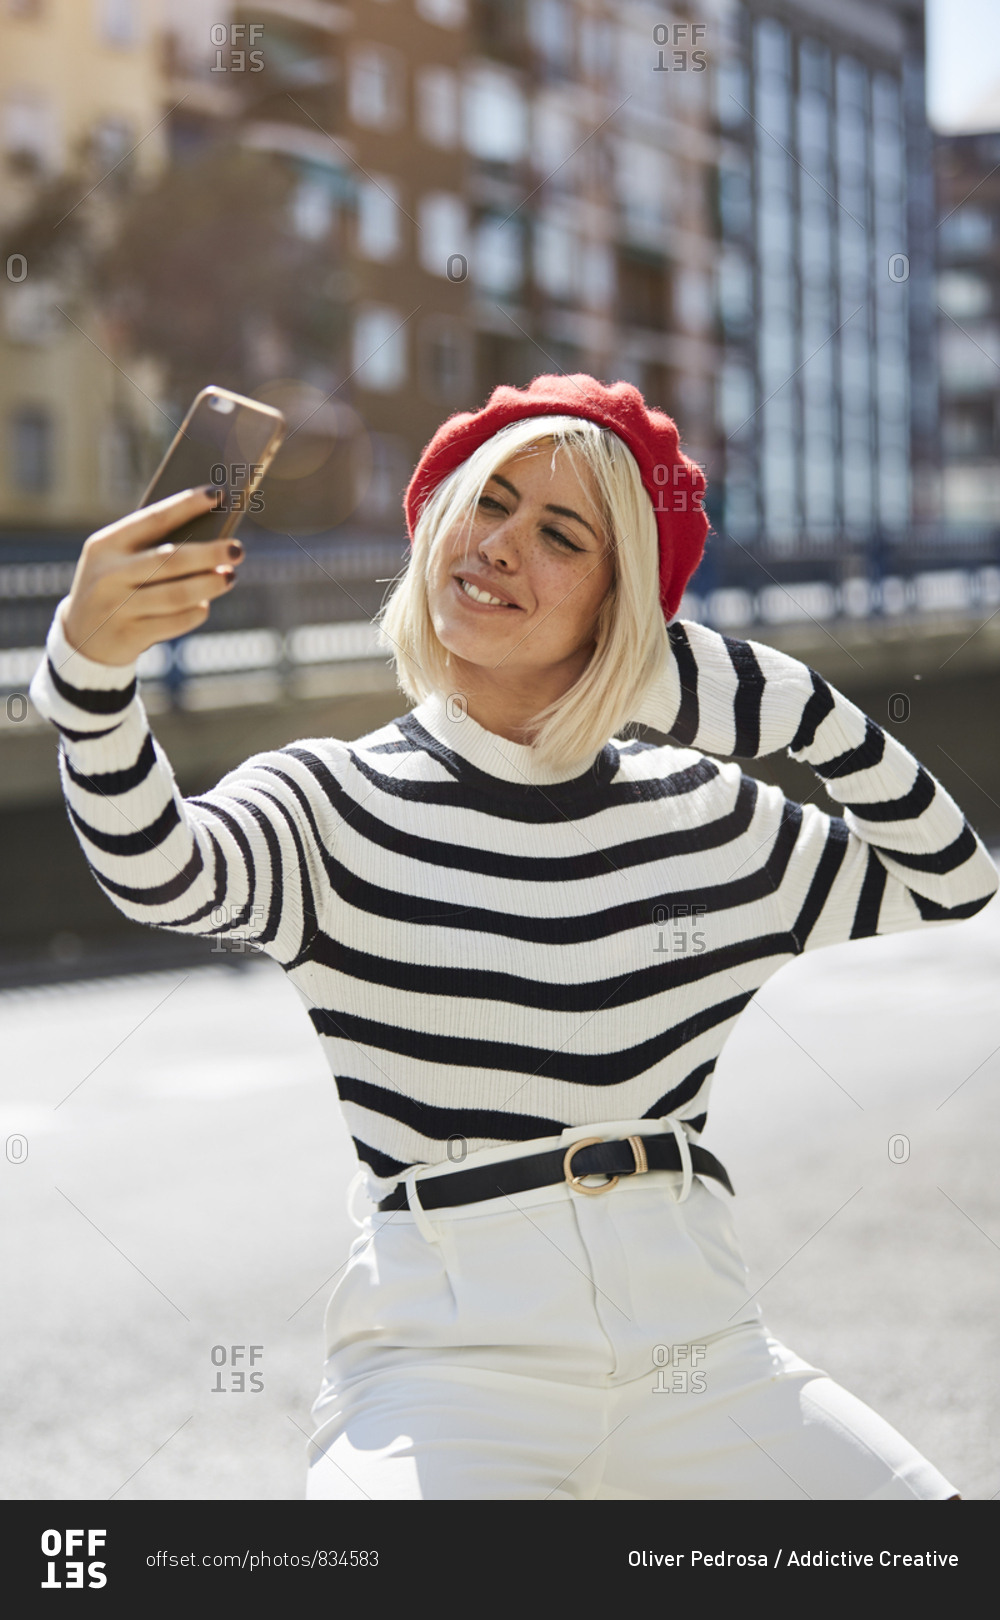 Young smiling pretty woman in French red cap, striped blouse and white shorts taking photo on urban background